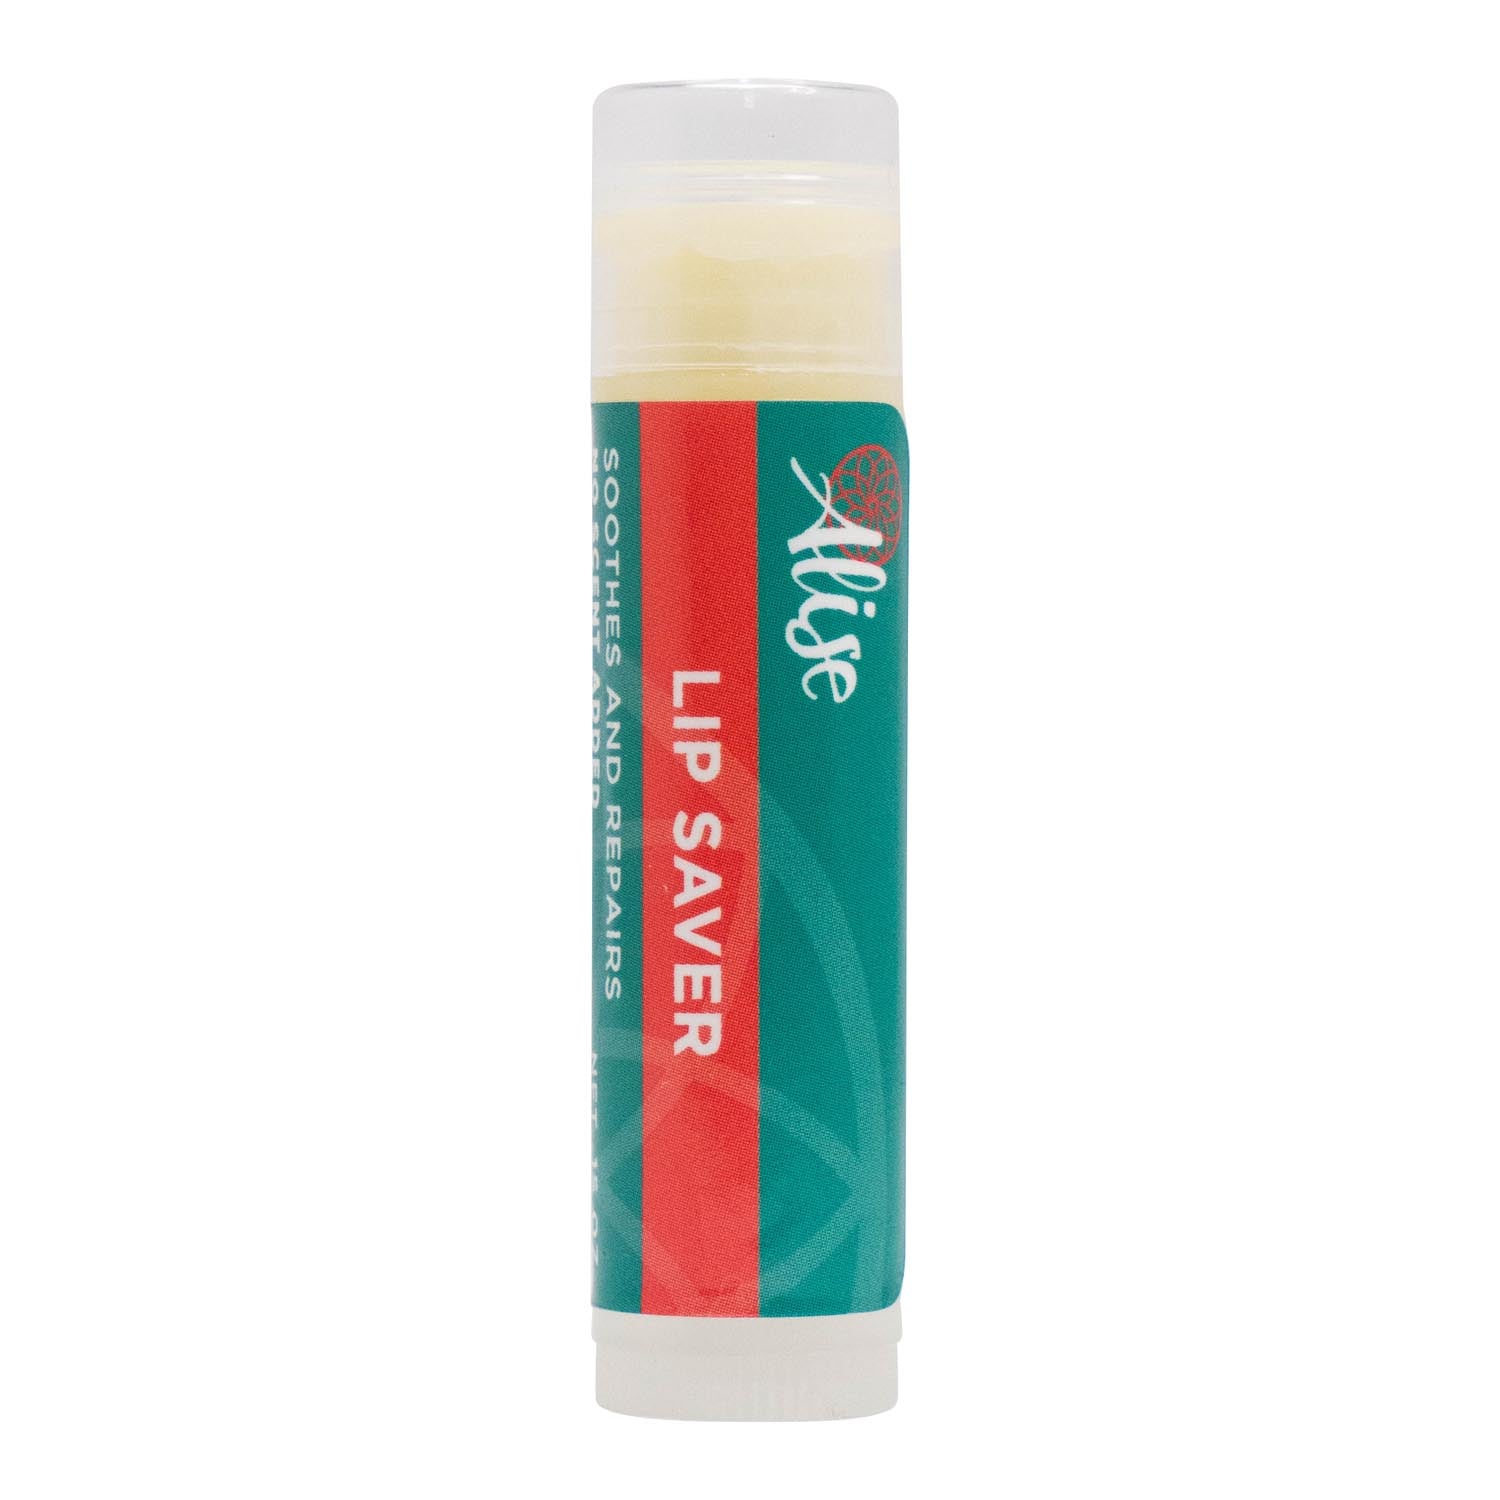 Lip Saver Balm handcrafted by Alise Body Care